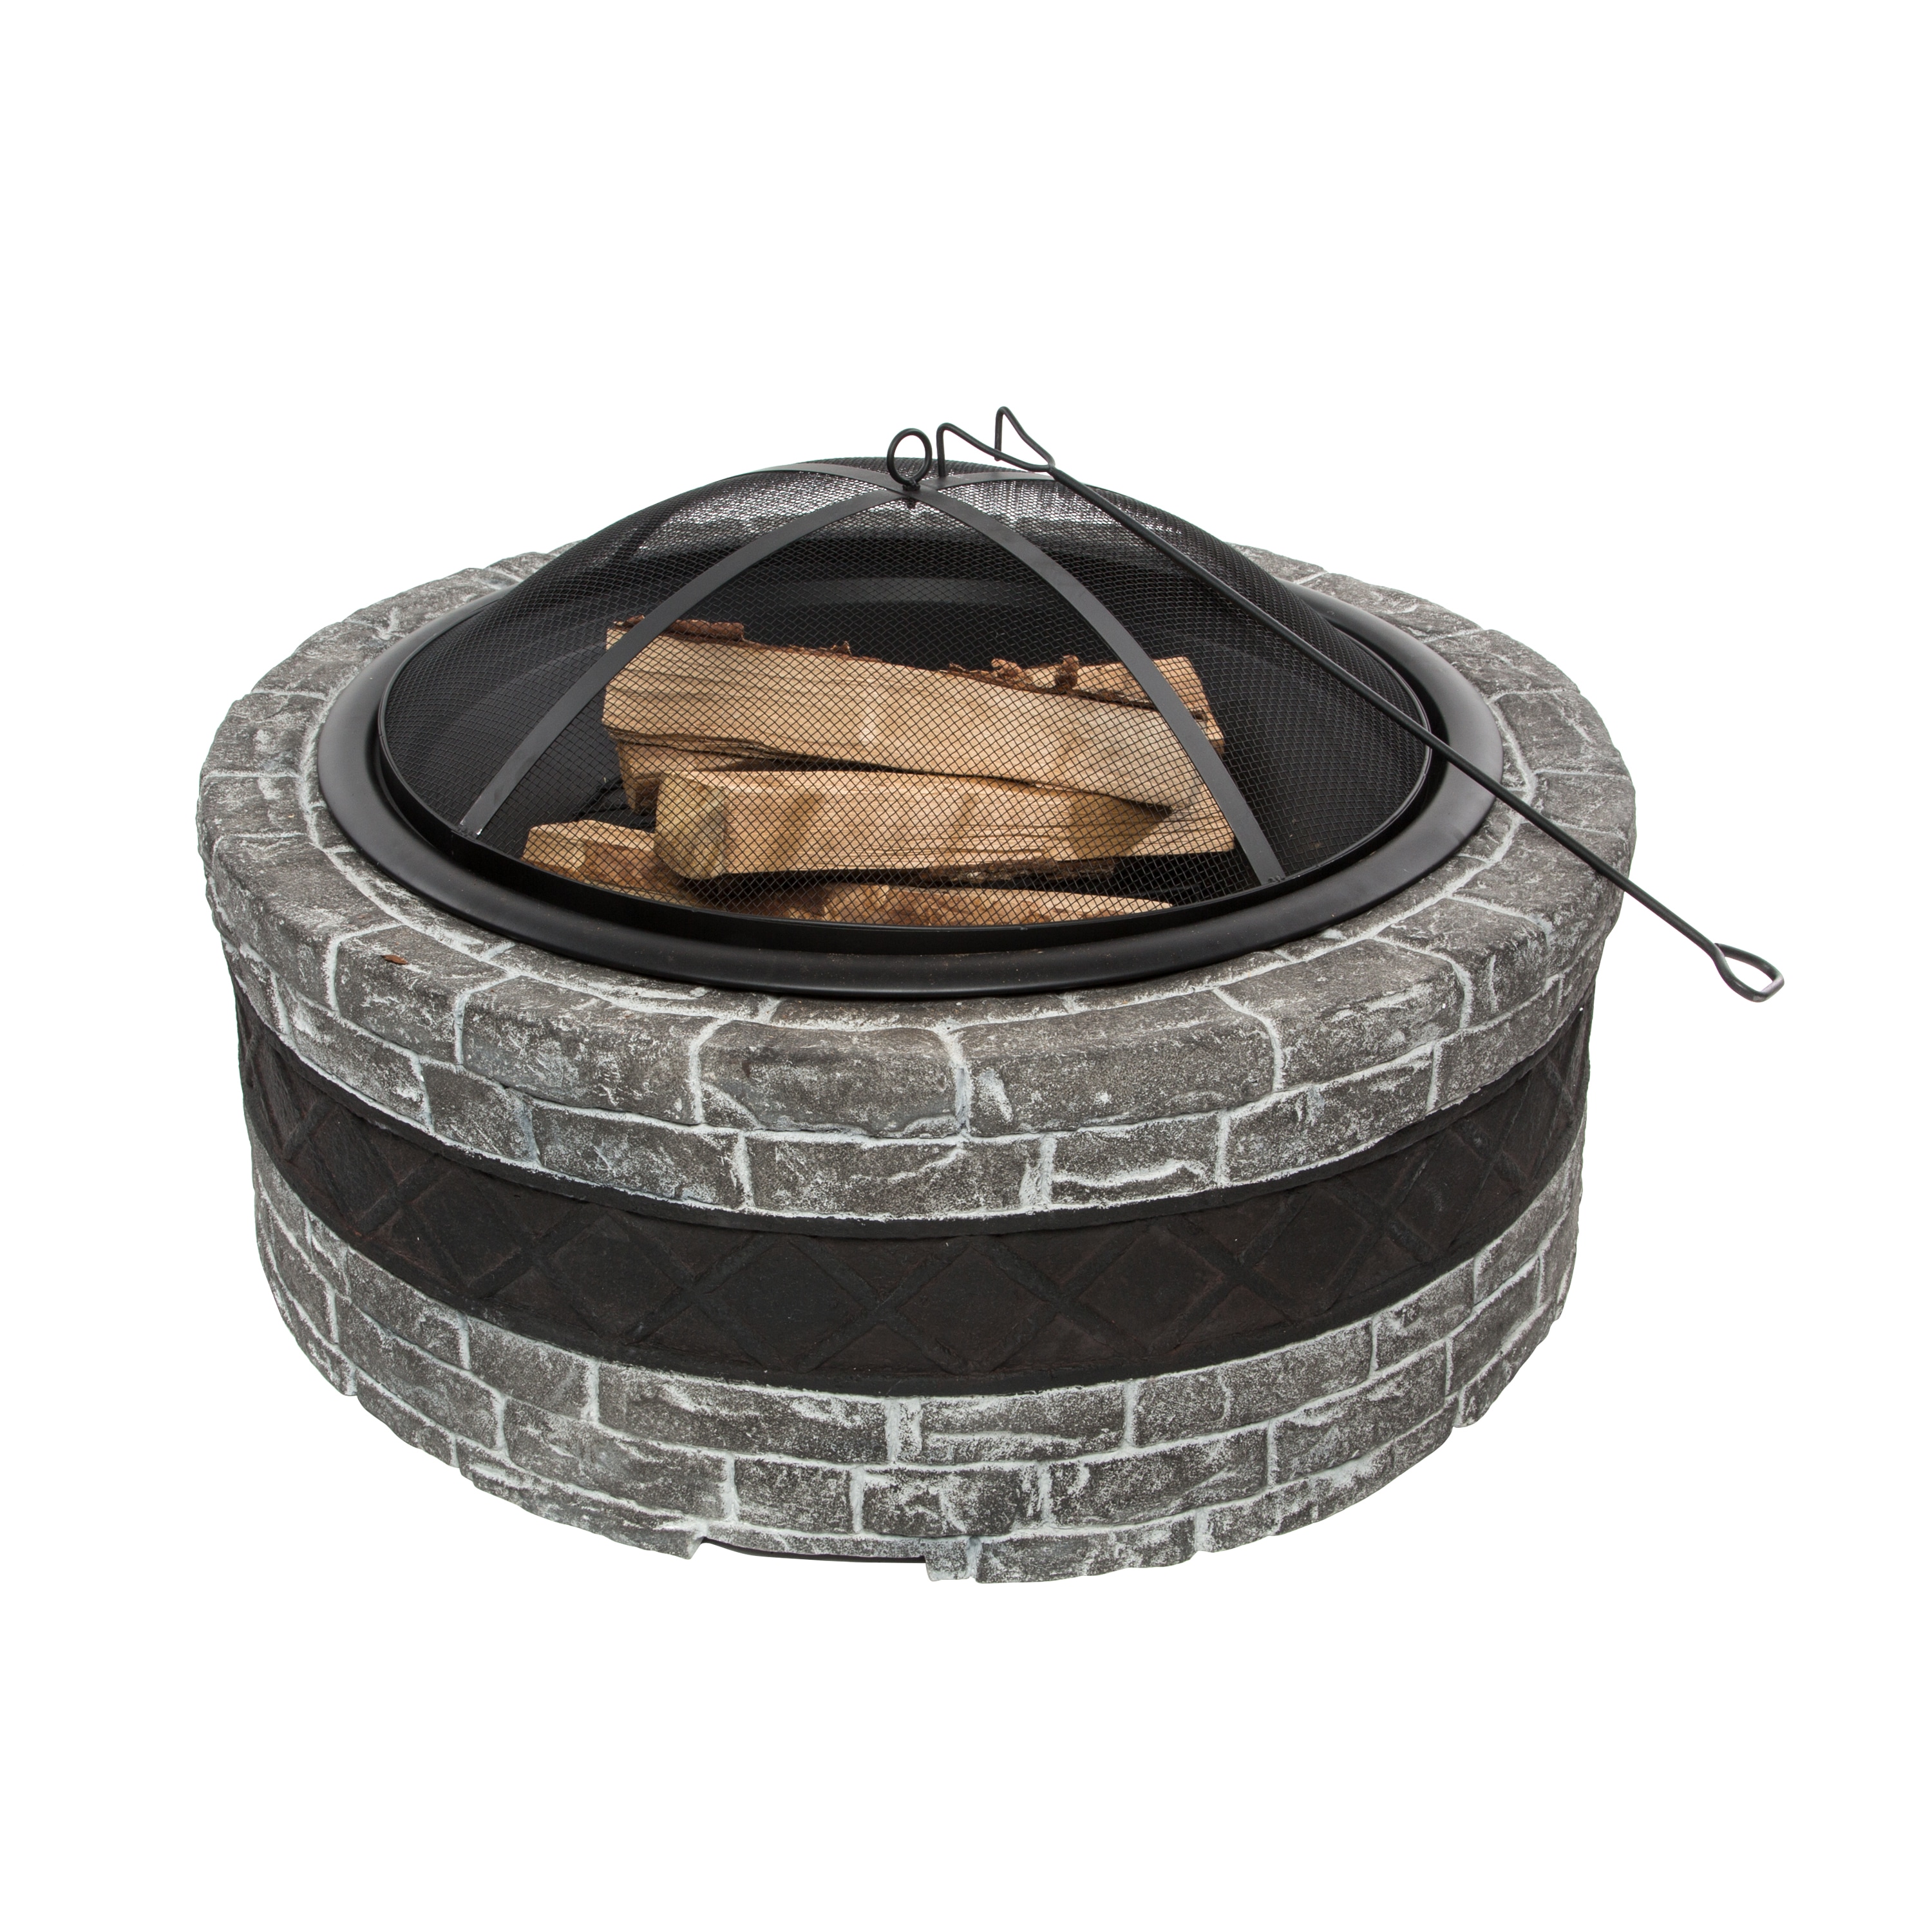 Gray Stone Wood Burning Fire Pit, 35 Inch Fire Pit